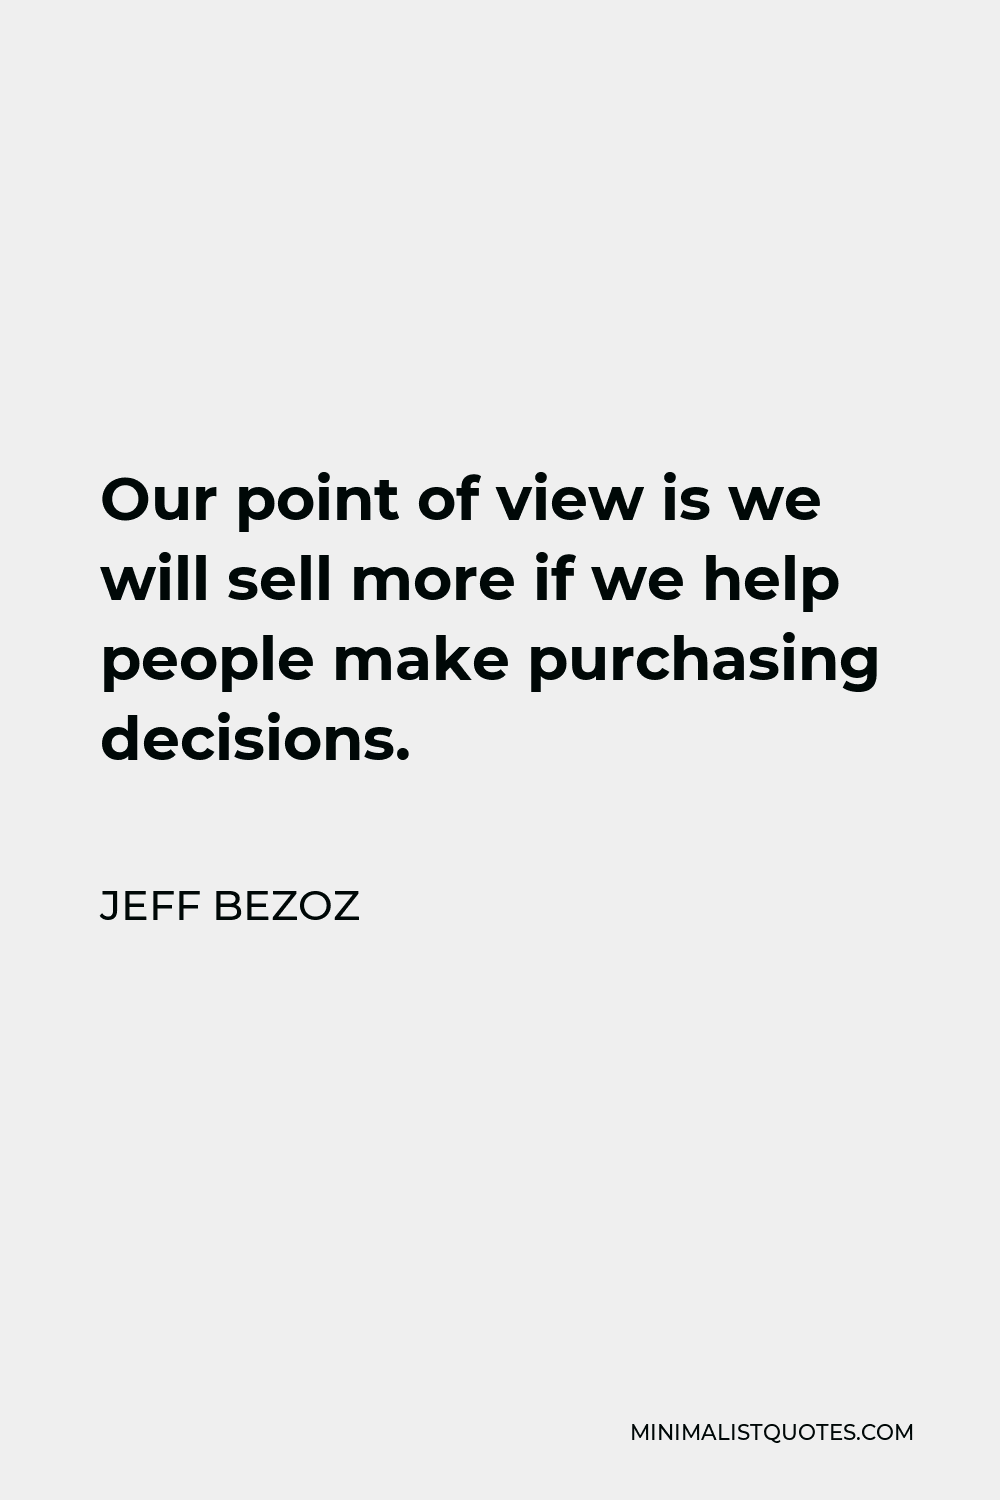 Jeff Bezoz Quote - Our point of view is we will sell more if we help people make purchasing decisions.